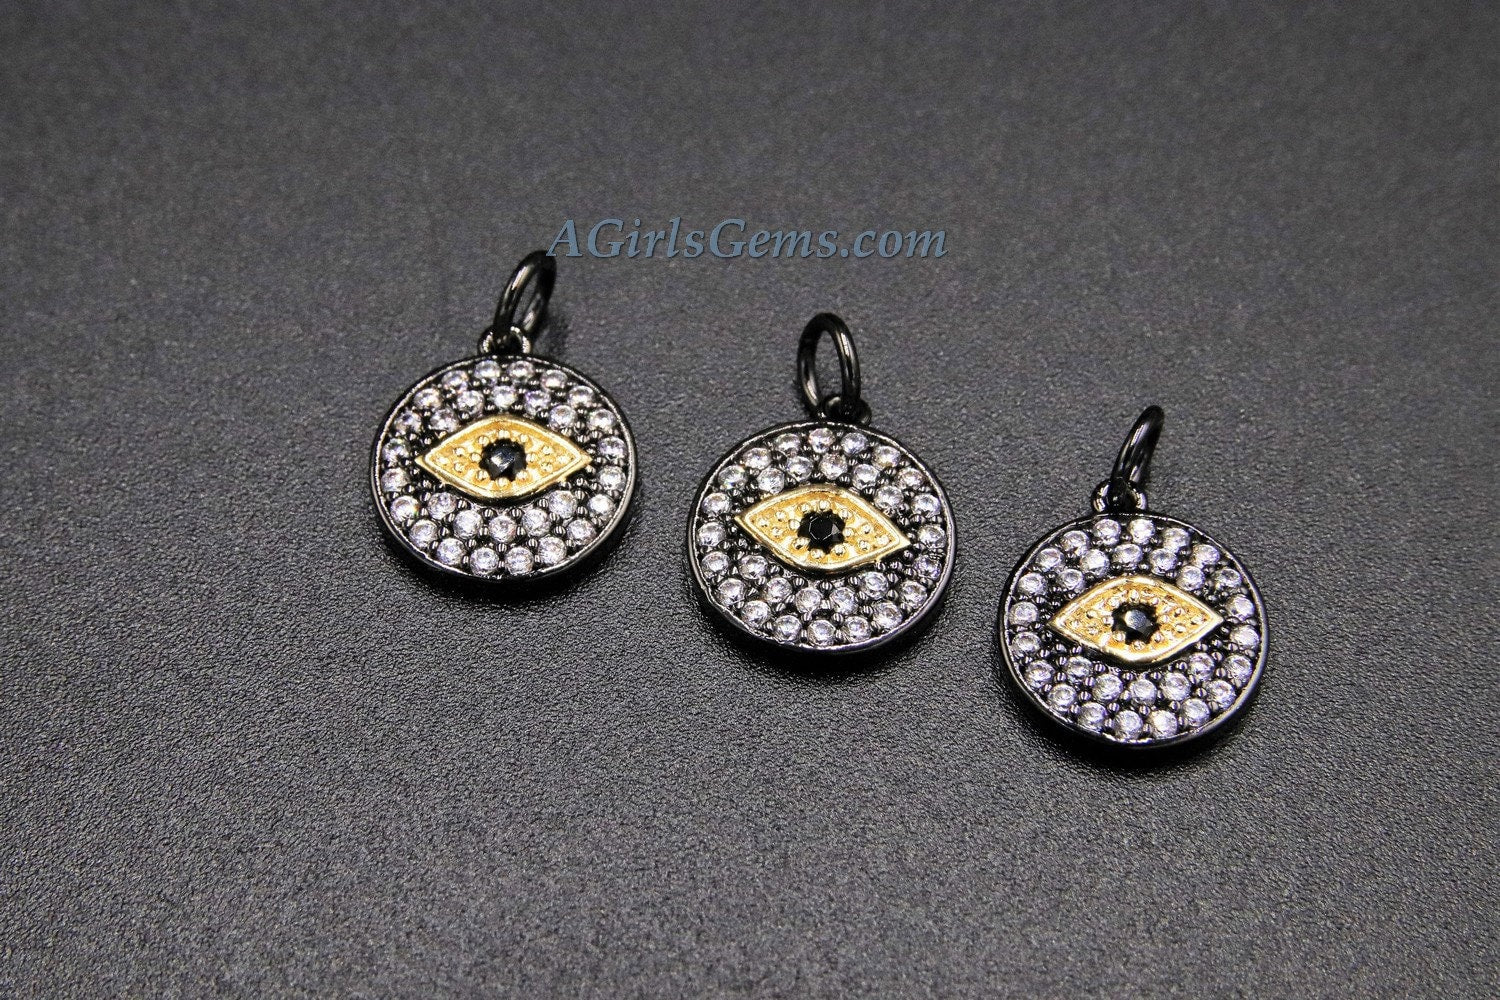 Evil Eye Charm, *NEW* Black and Gold CZ Micro Pave Small Round Disc Charm, 13 x 16 mm Mini Evil Eye for Bracelet Charms